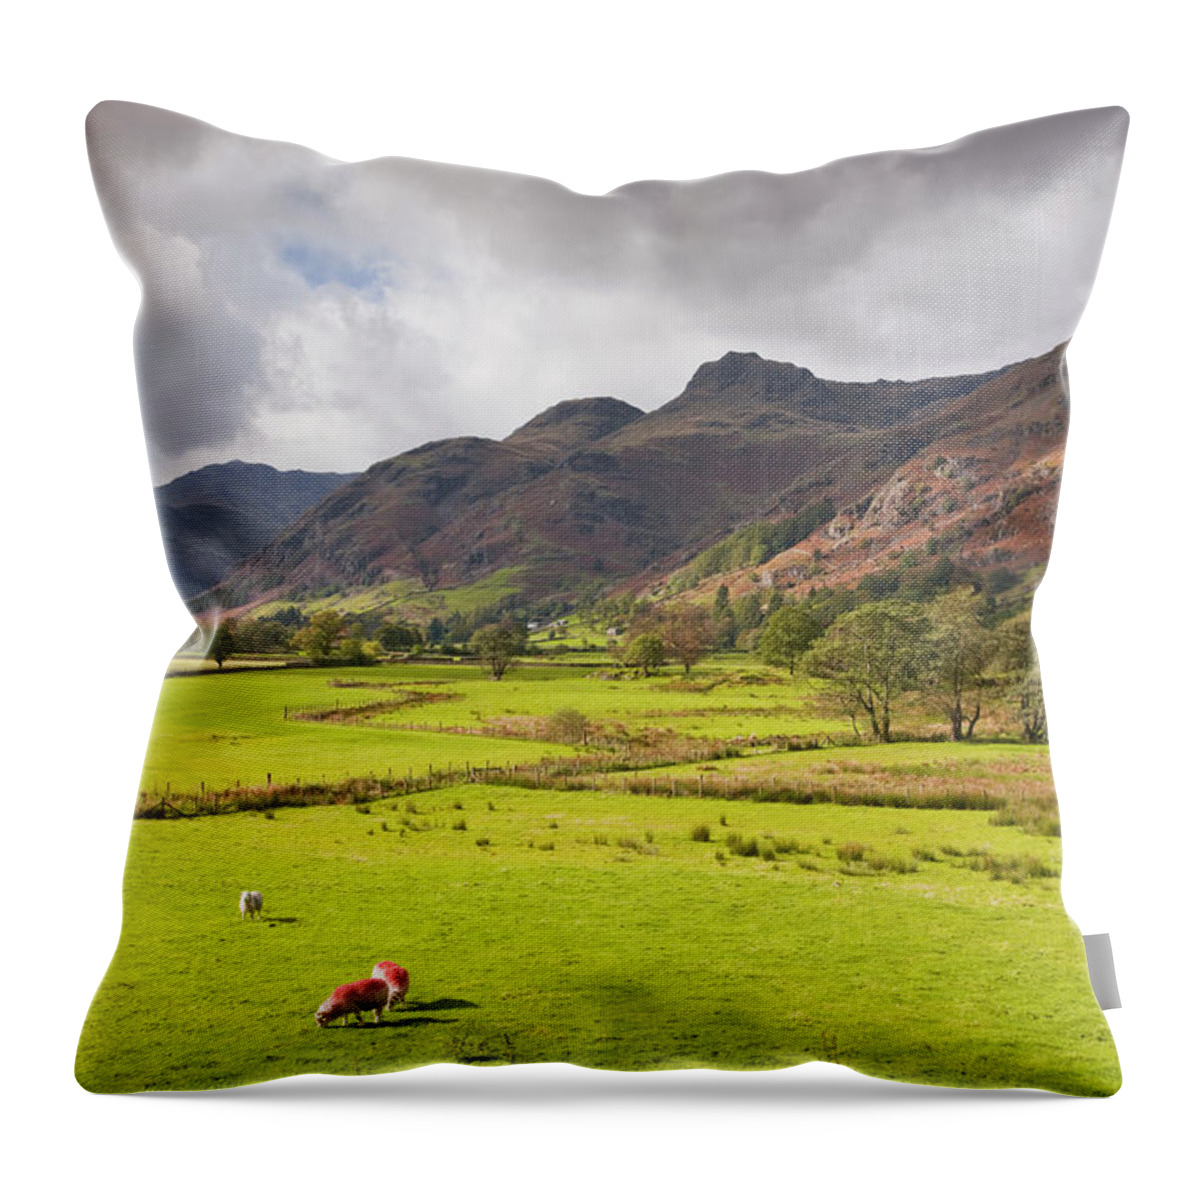 Scenics Throw Pillow featuring the photograph The Langdale Pikes In Great Langdale by Julian Elliott Photography